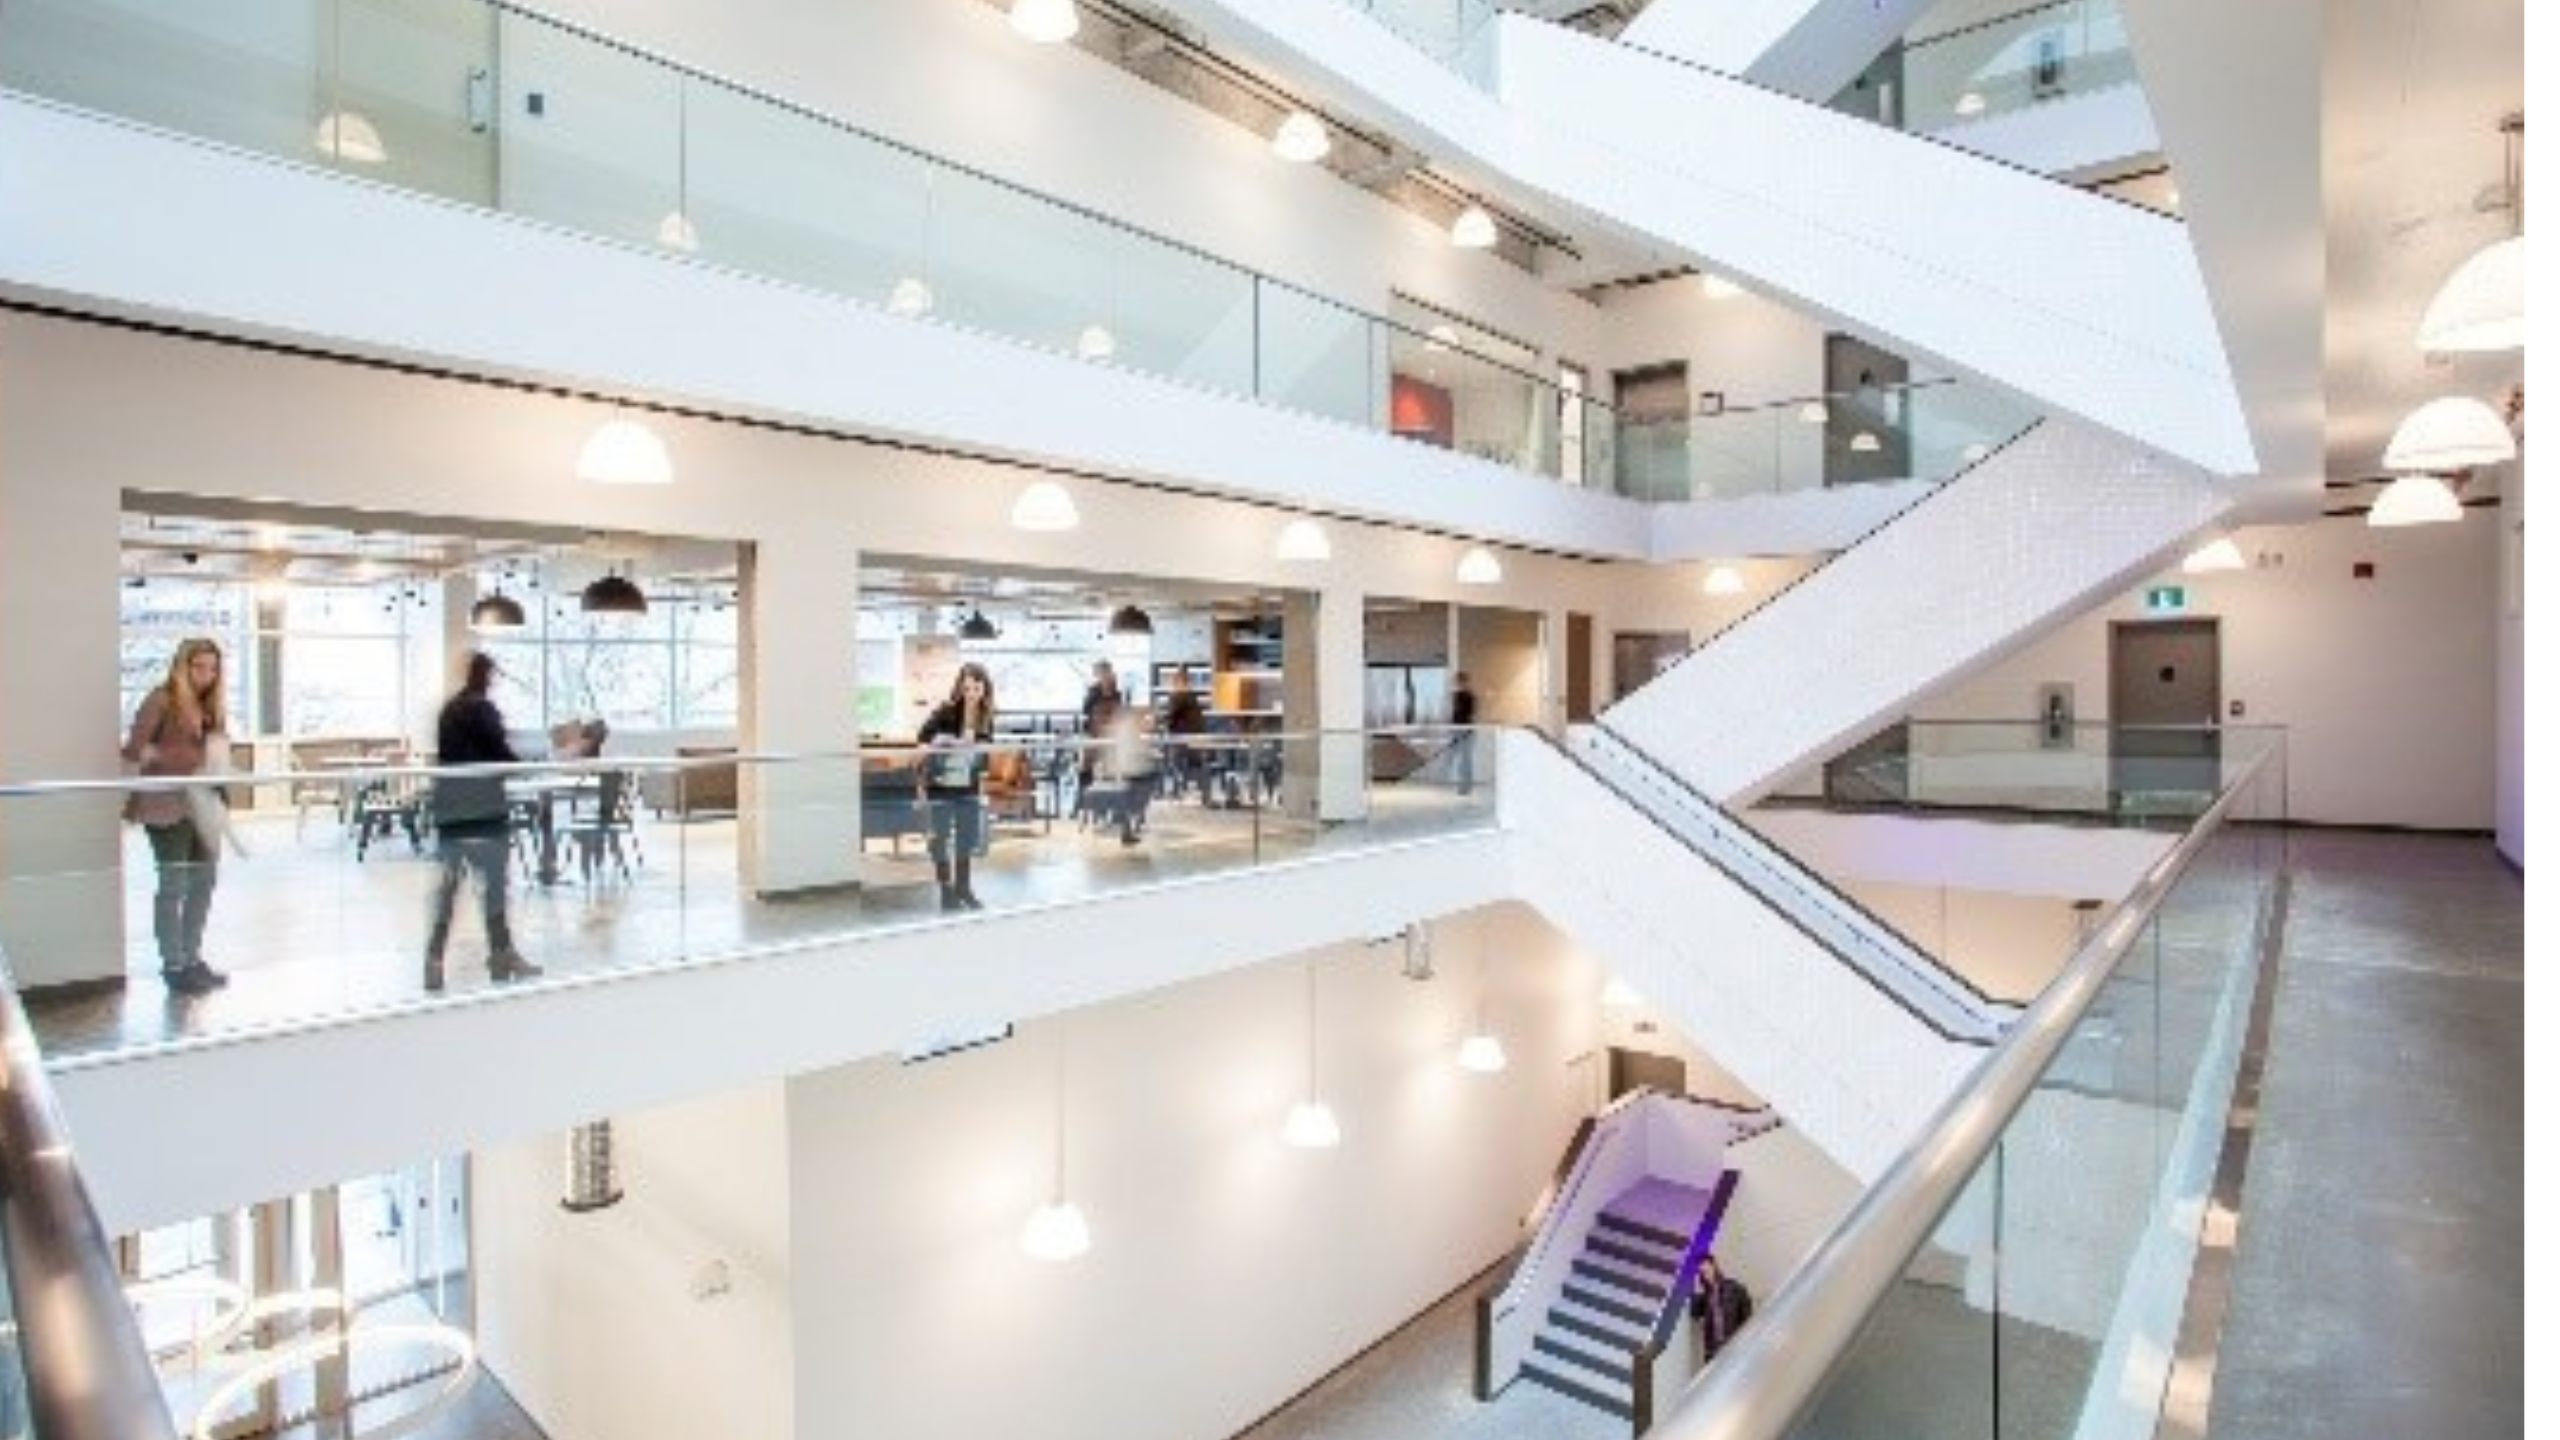 Kelowna Innovation Centre interior, with white staircases, people walking and brightly lit hallways